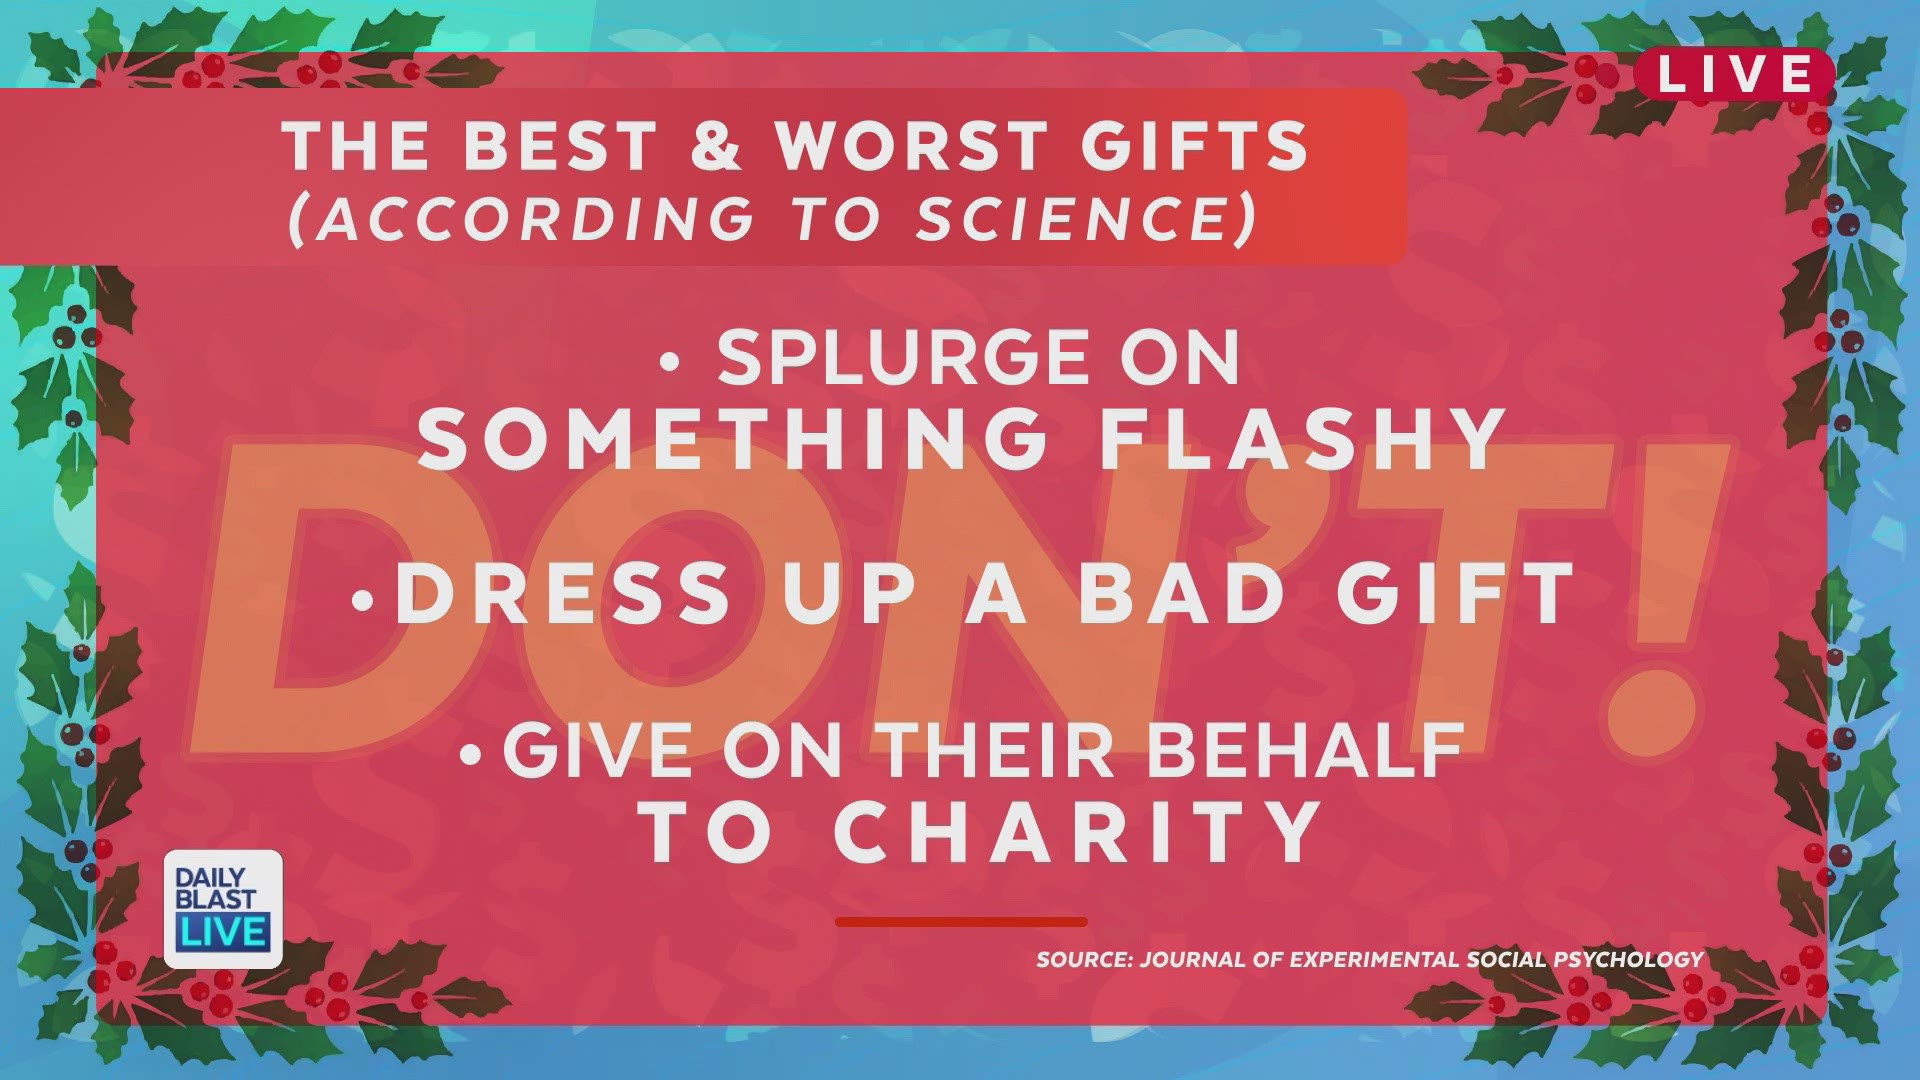 Most  holiday shoppers take pride in finding thoughtful gifts for their loved ones, some shoppers do not. You will not believe some of the worst Christmas gifts real people actually received.